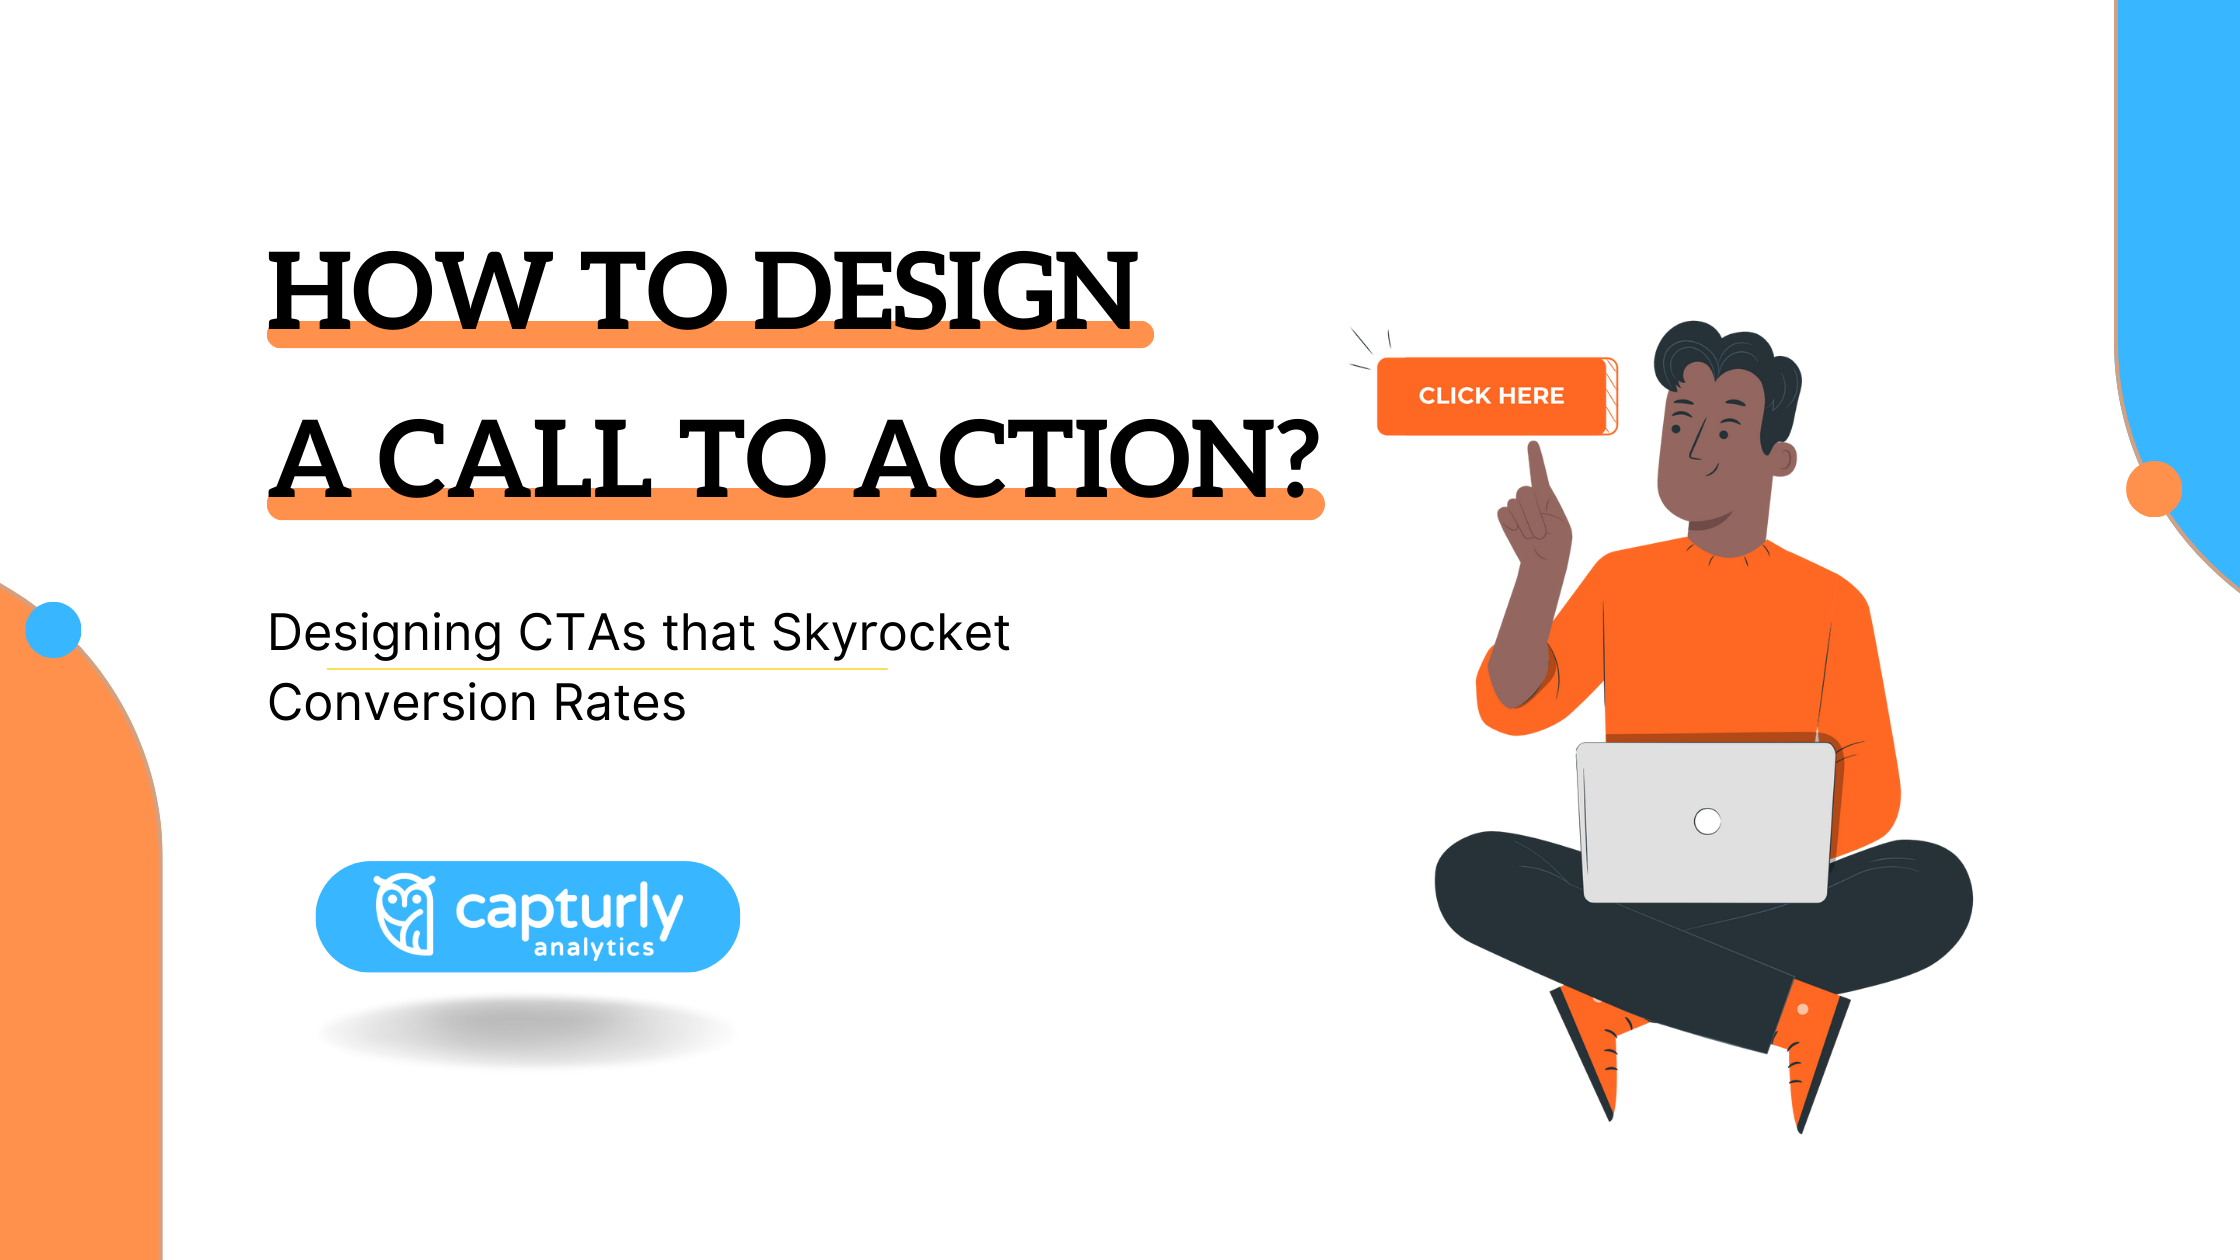 How to design a call to action